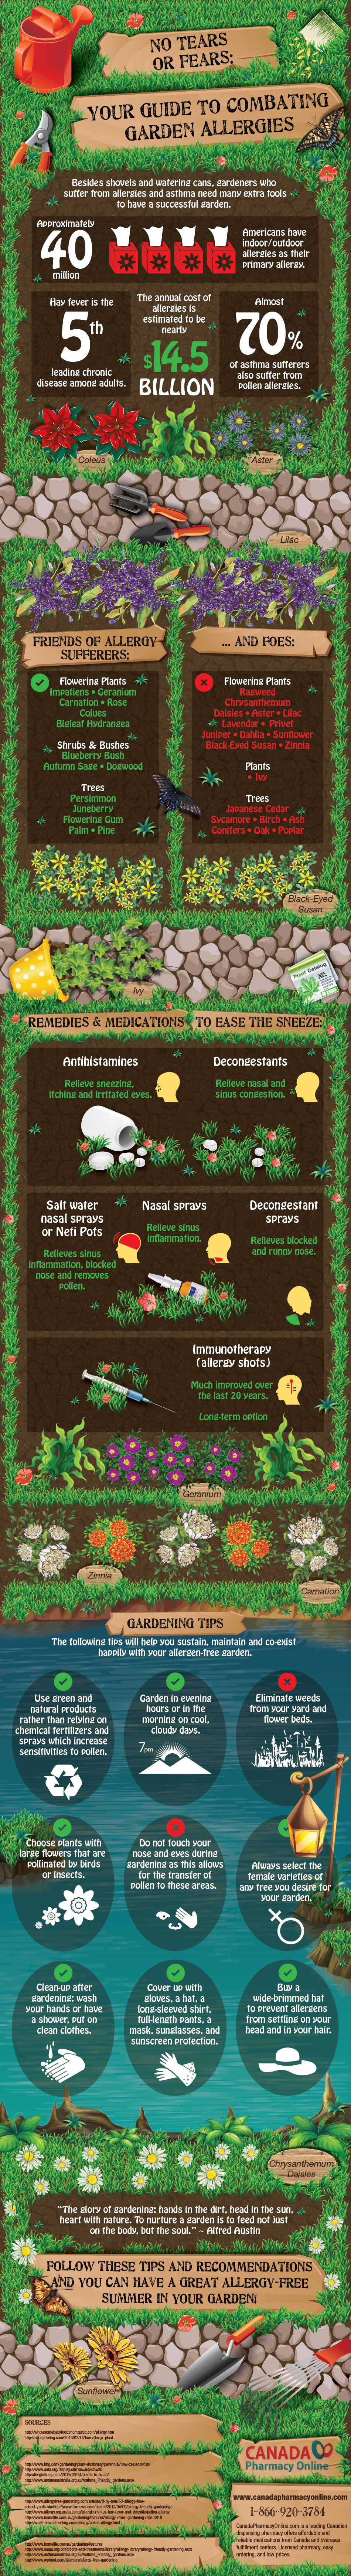 Your Guid to Combating Garden Allergies